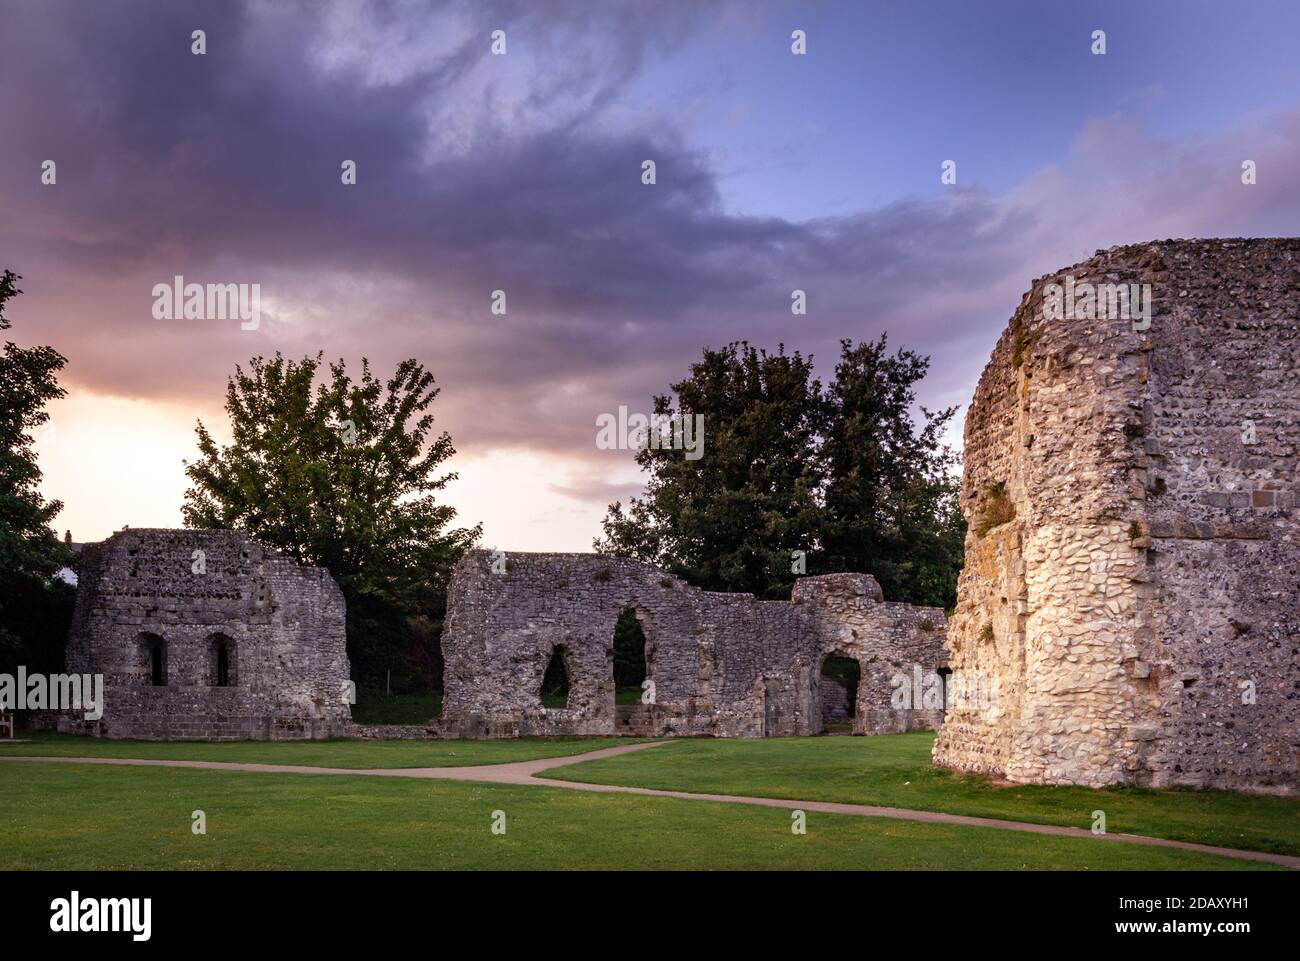 LEWES, ENGLAND - AUGUST 19, 2019: Ruins of Lewes priory, the first Cluniac foundation in England, which was demolished by thomas Cromwell Stock Photo